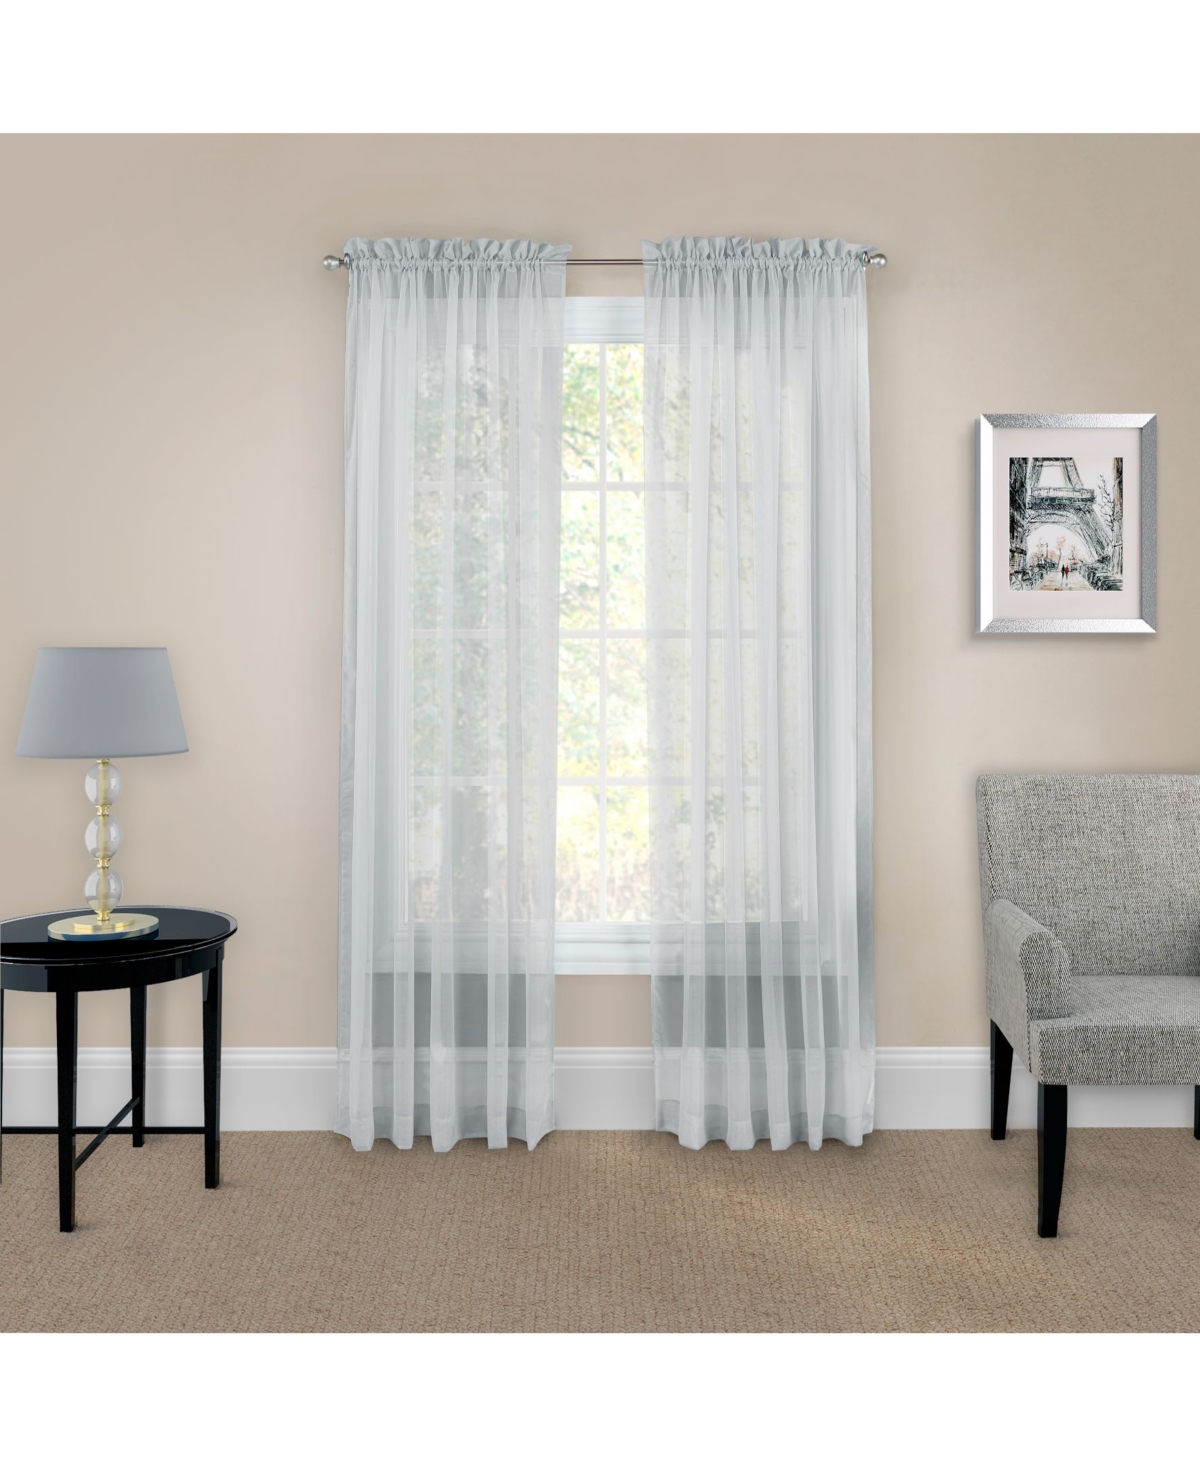 Pairs To Go Victoria Voile 84" x 118" Curtain Panel, Set of 2 - Charcoal